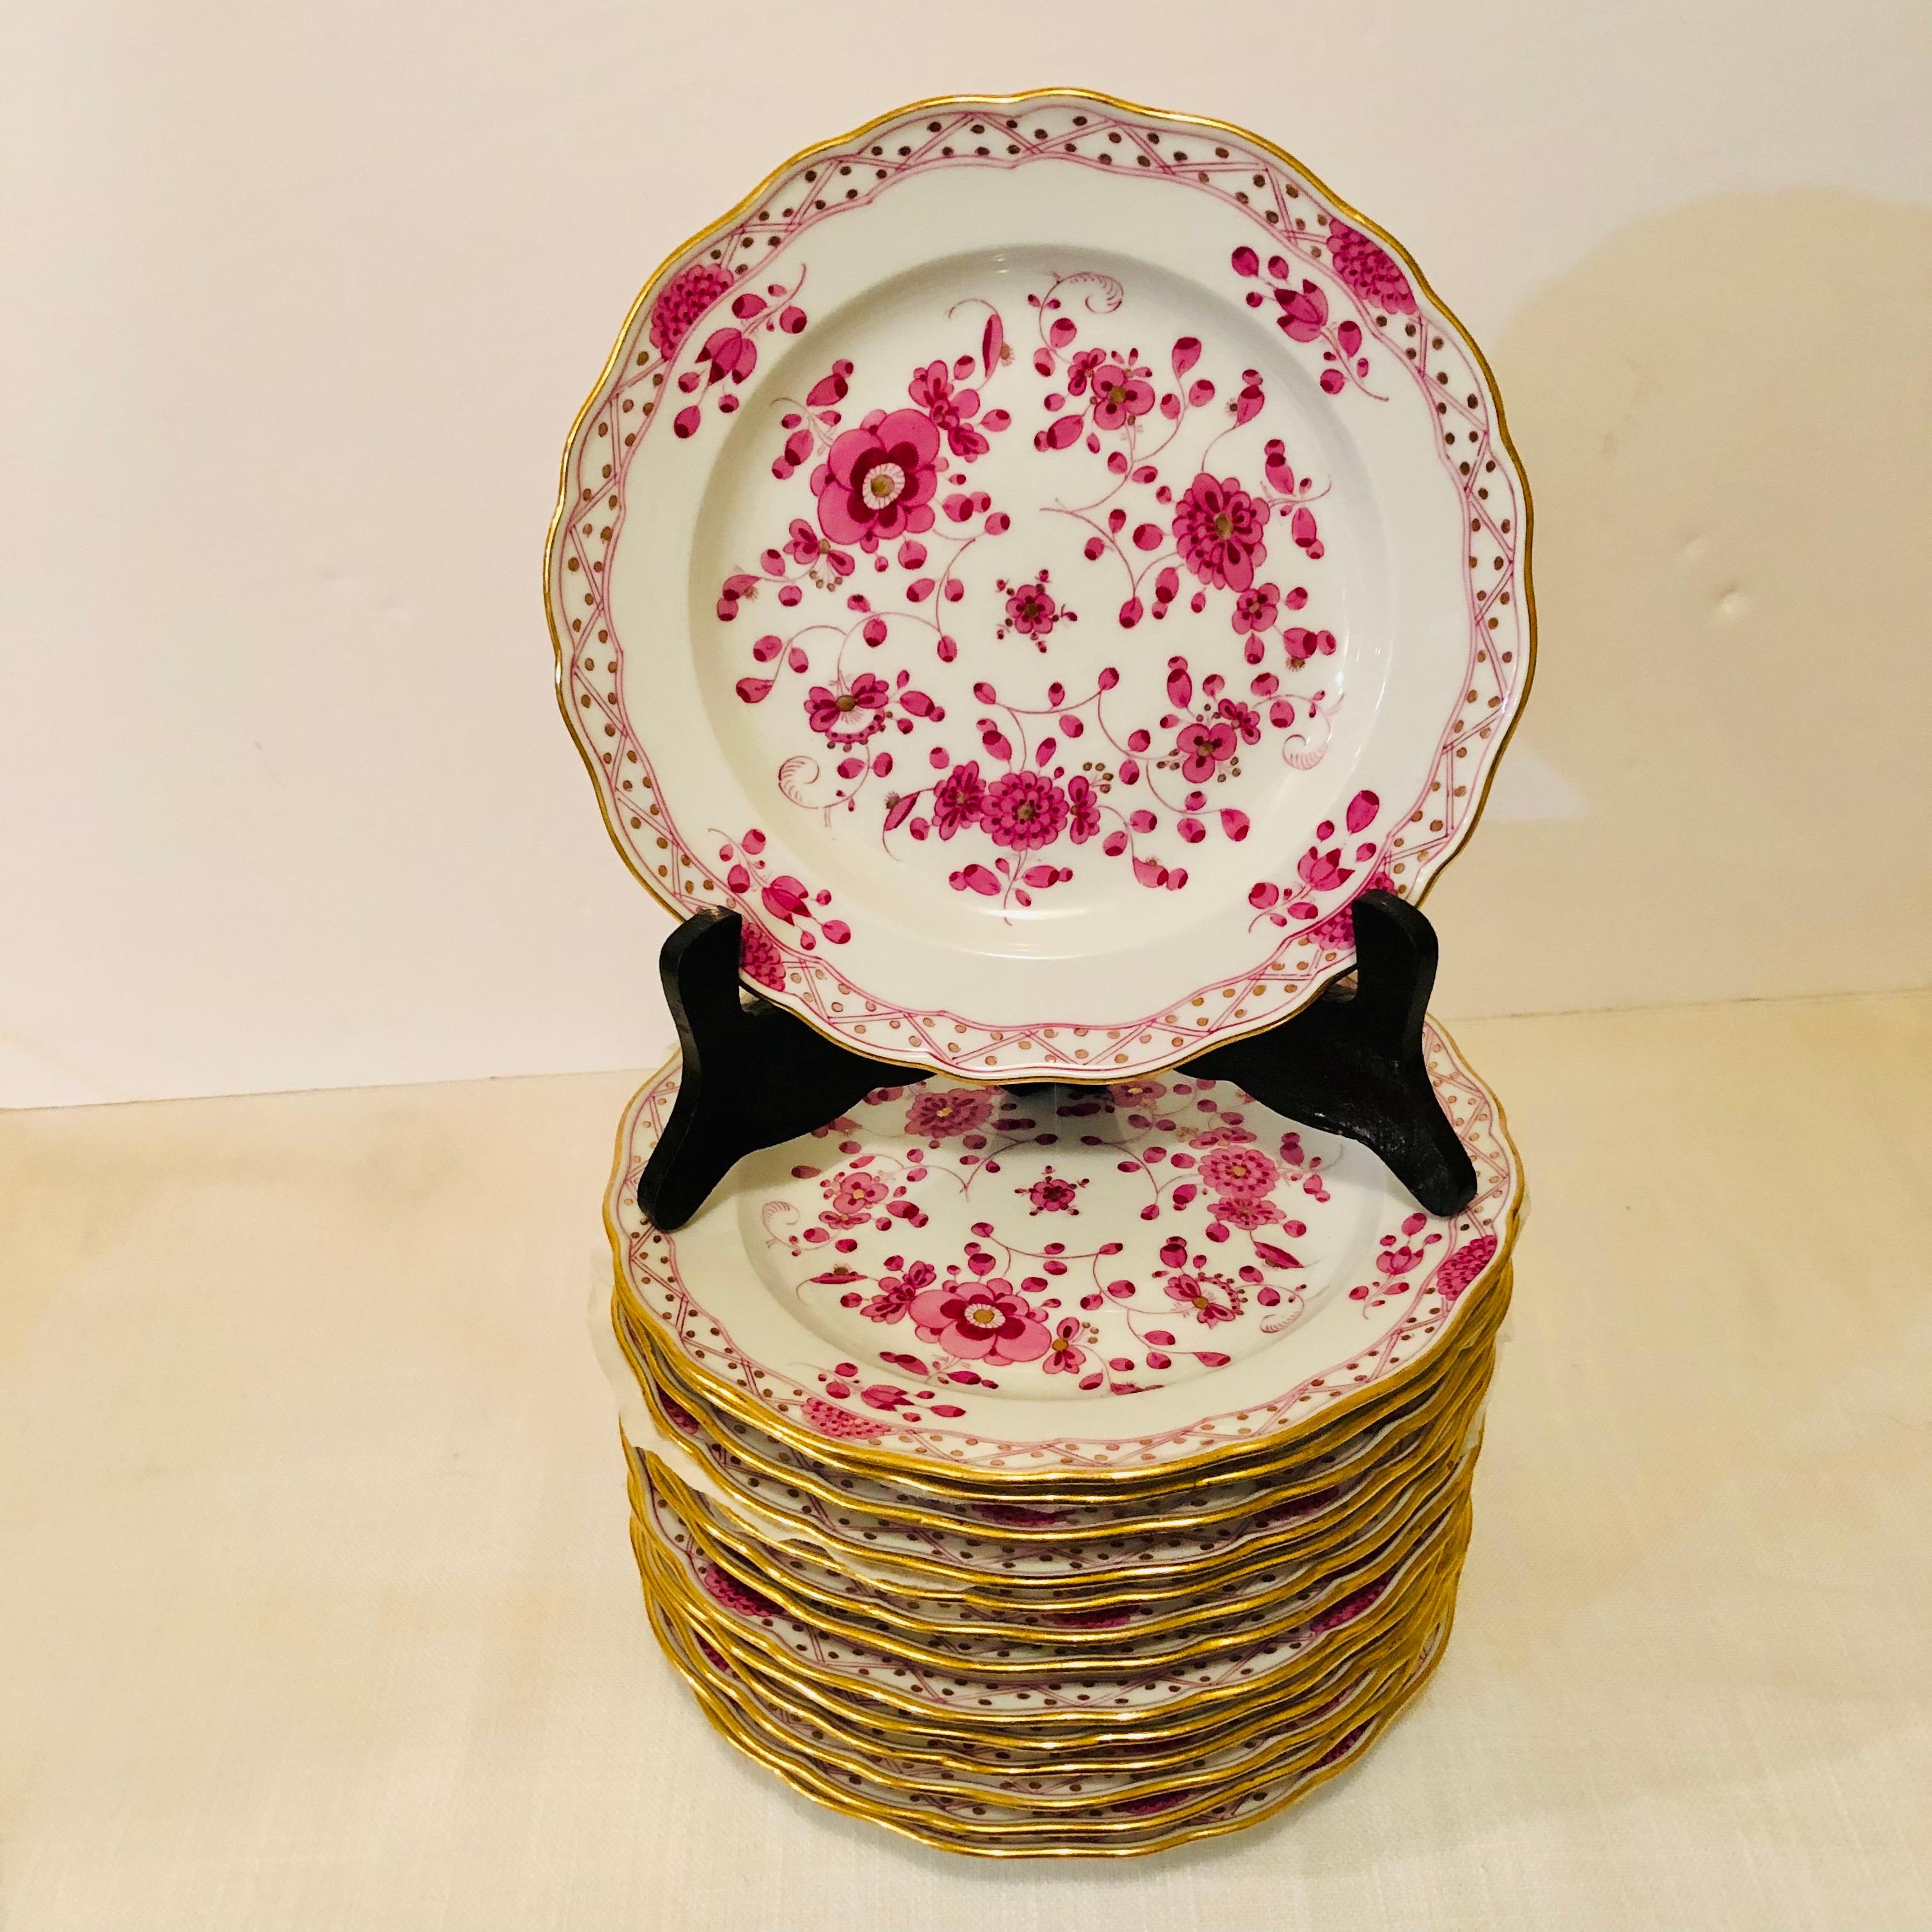 This is an exquisite set of fourteen Meissen purple Indian pattern dessert plates from the 1890s. It has detailed paintings of pink flowers with some purple and gold accents on a white ground. The detail of the painting on these dessert plates is